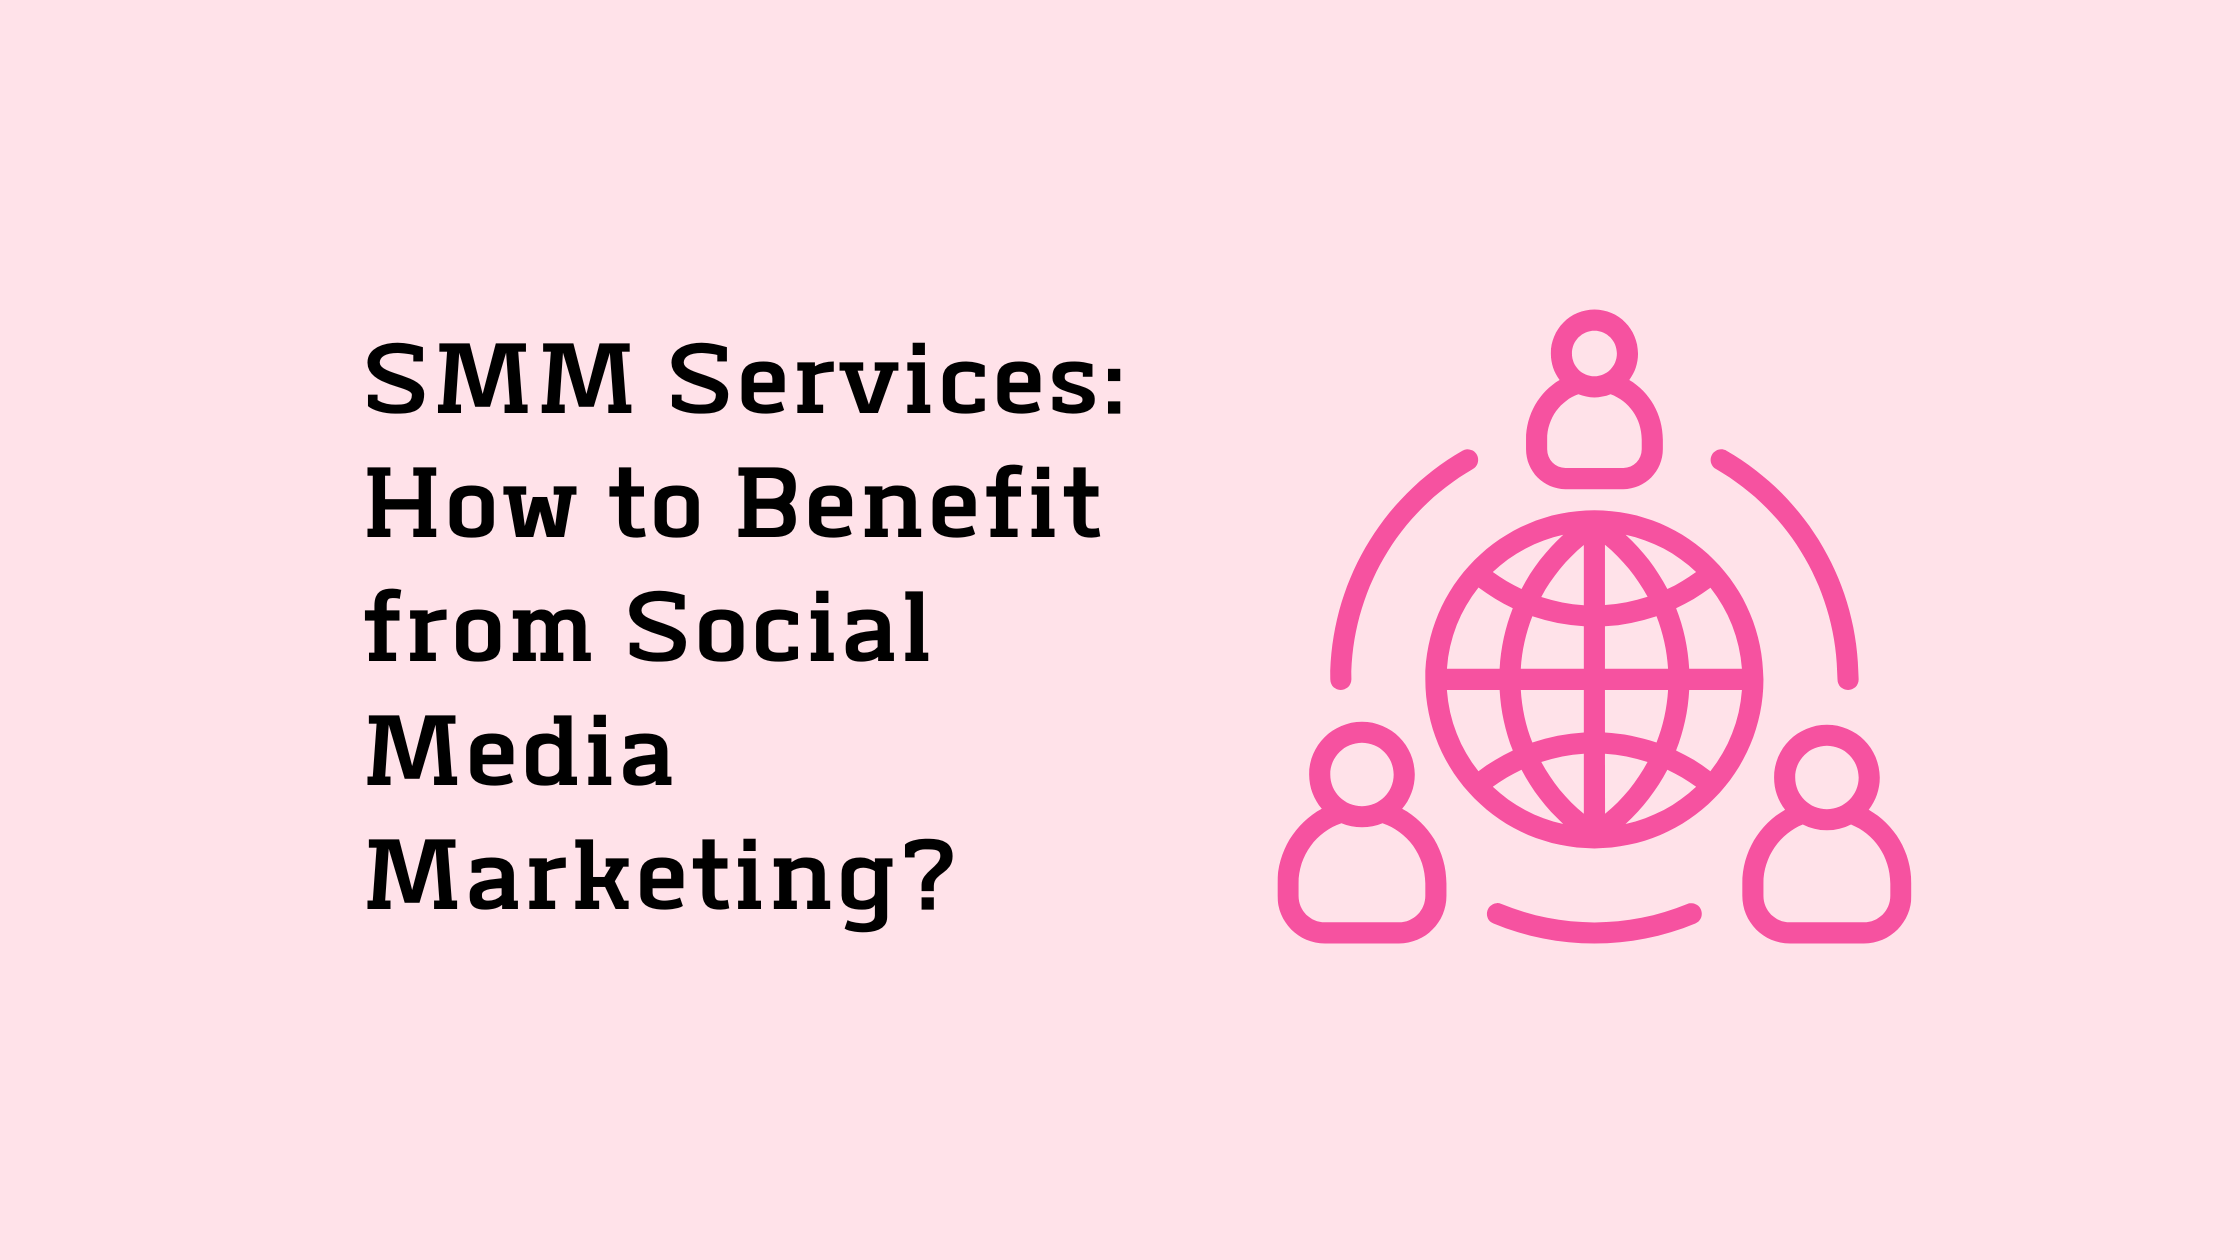 SMM Services How to Benefit from Social Media Marketing